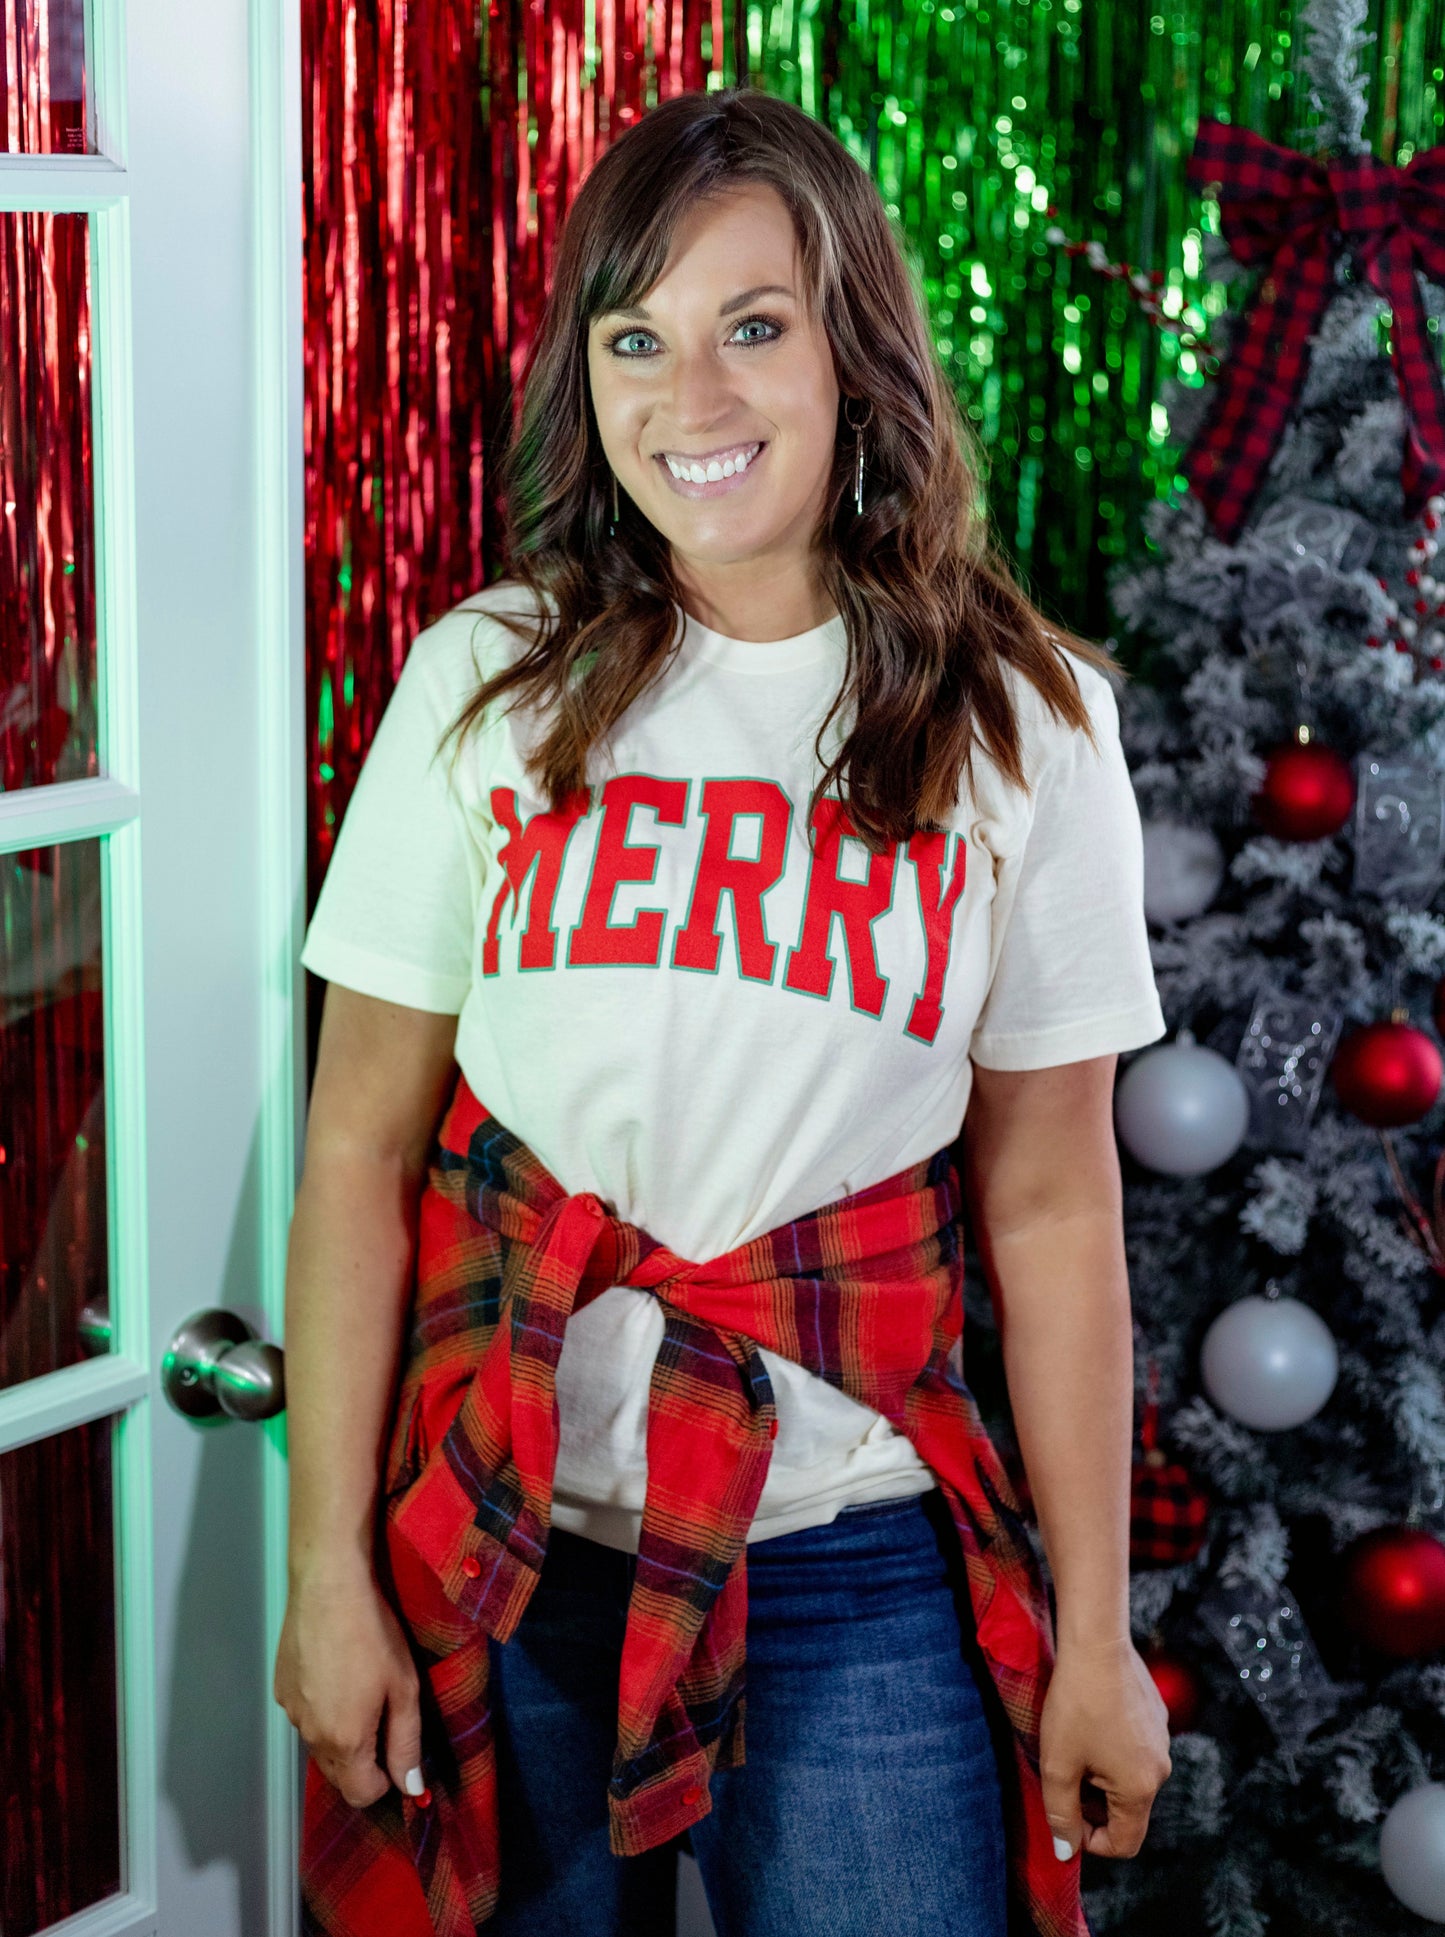 Merry Arch Tee